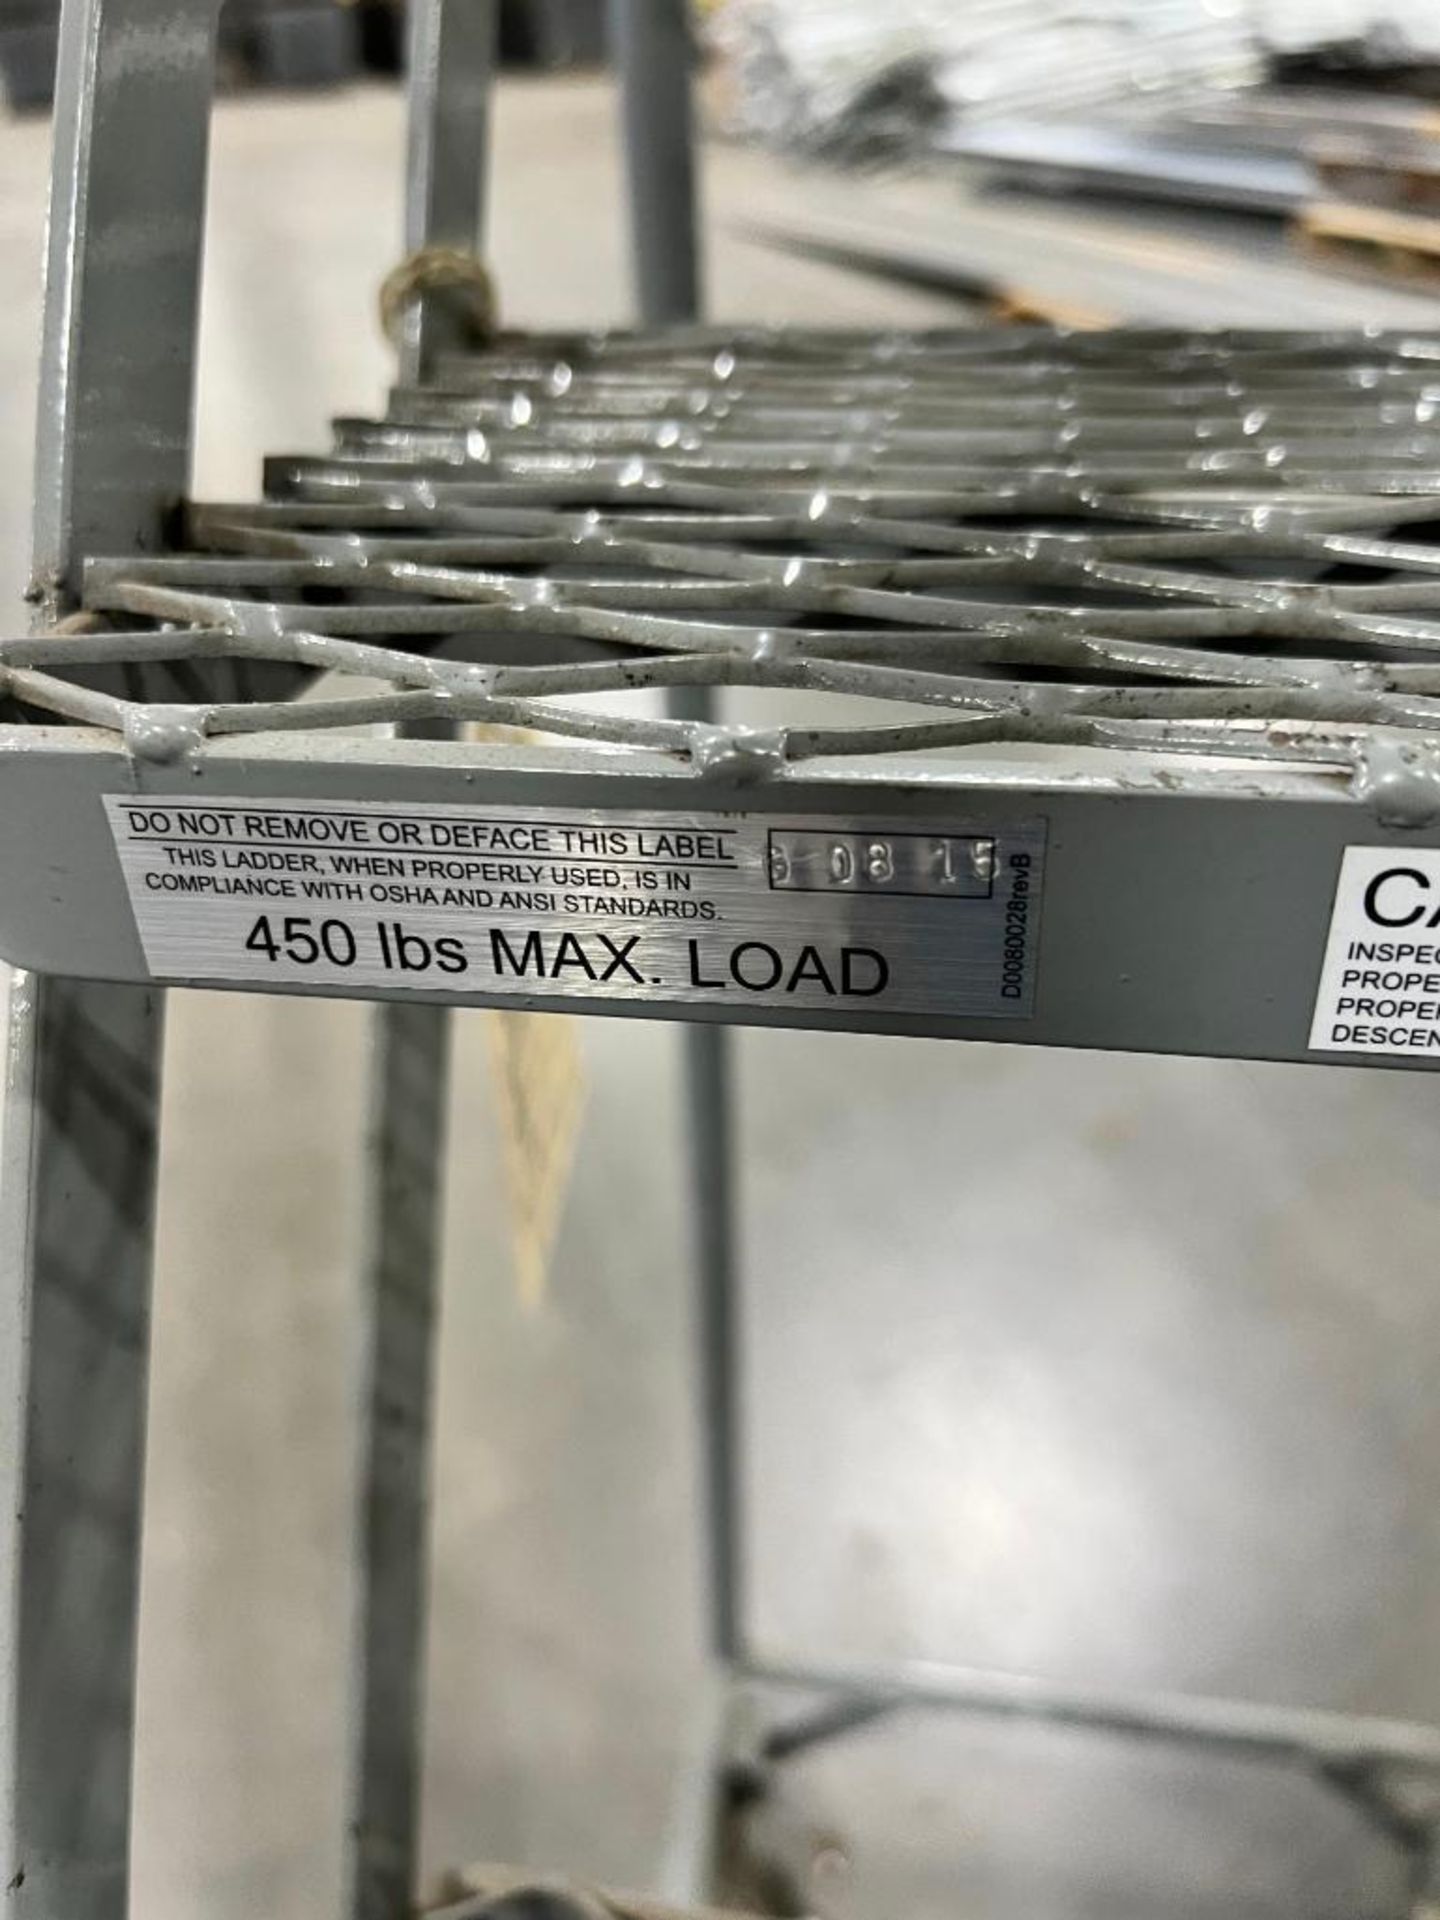 Uline Rolling Ladder, 450 LB. Max. Load ($20 Loading Fee Will Be Added To Invoice) - Image 2 of 3